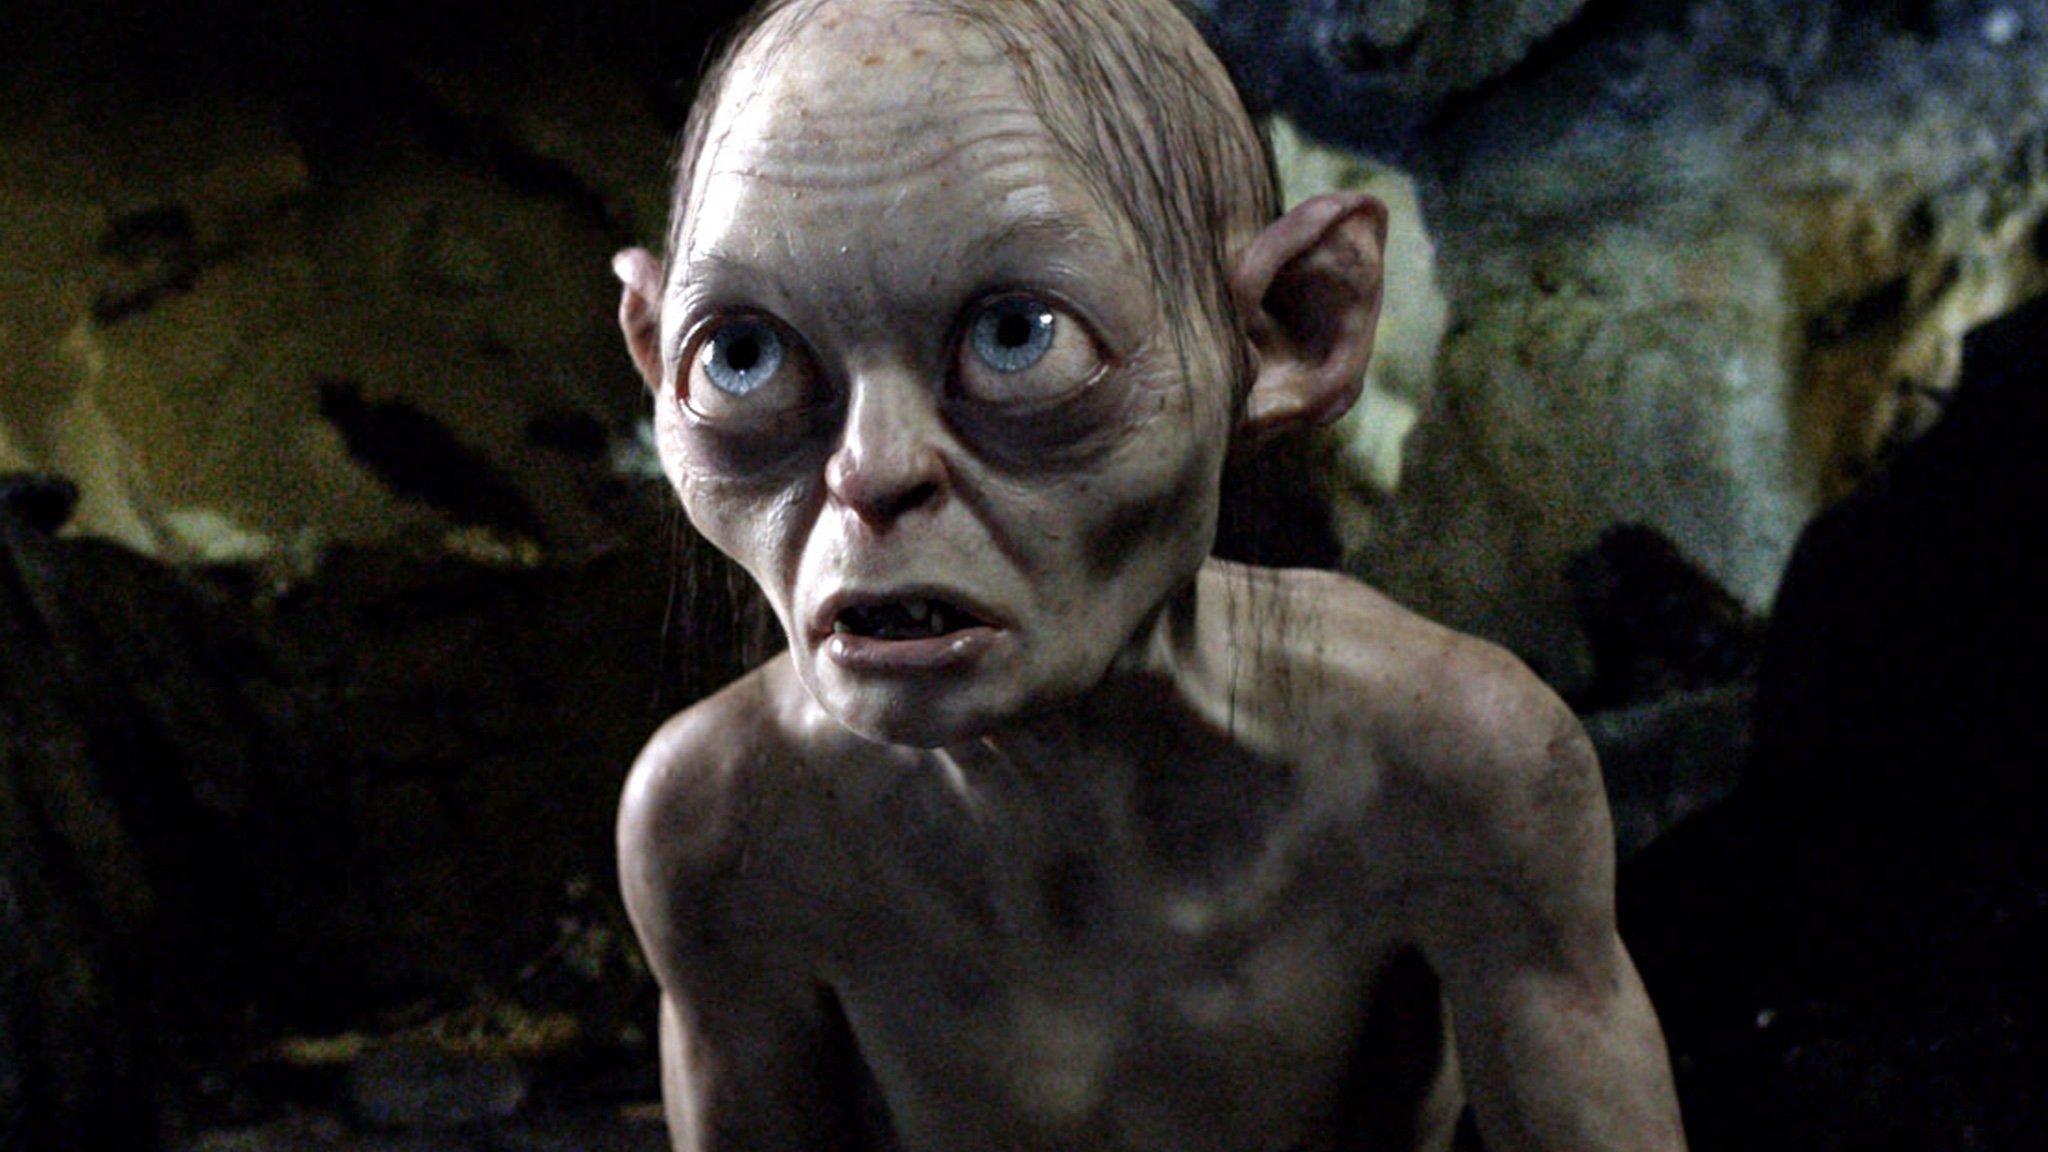 Here's some gameplay from The Lord of the Rings: Gollum